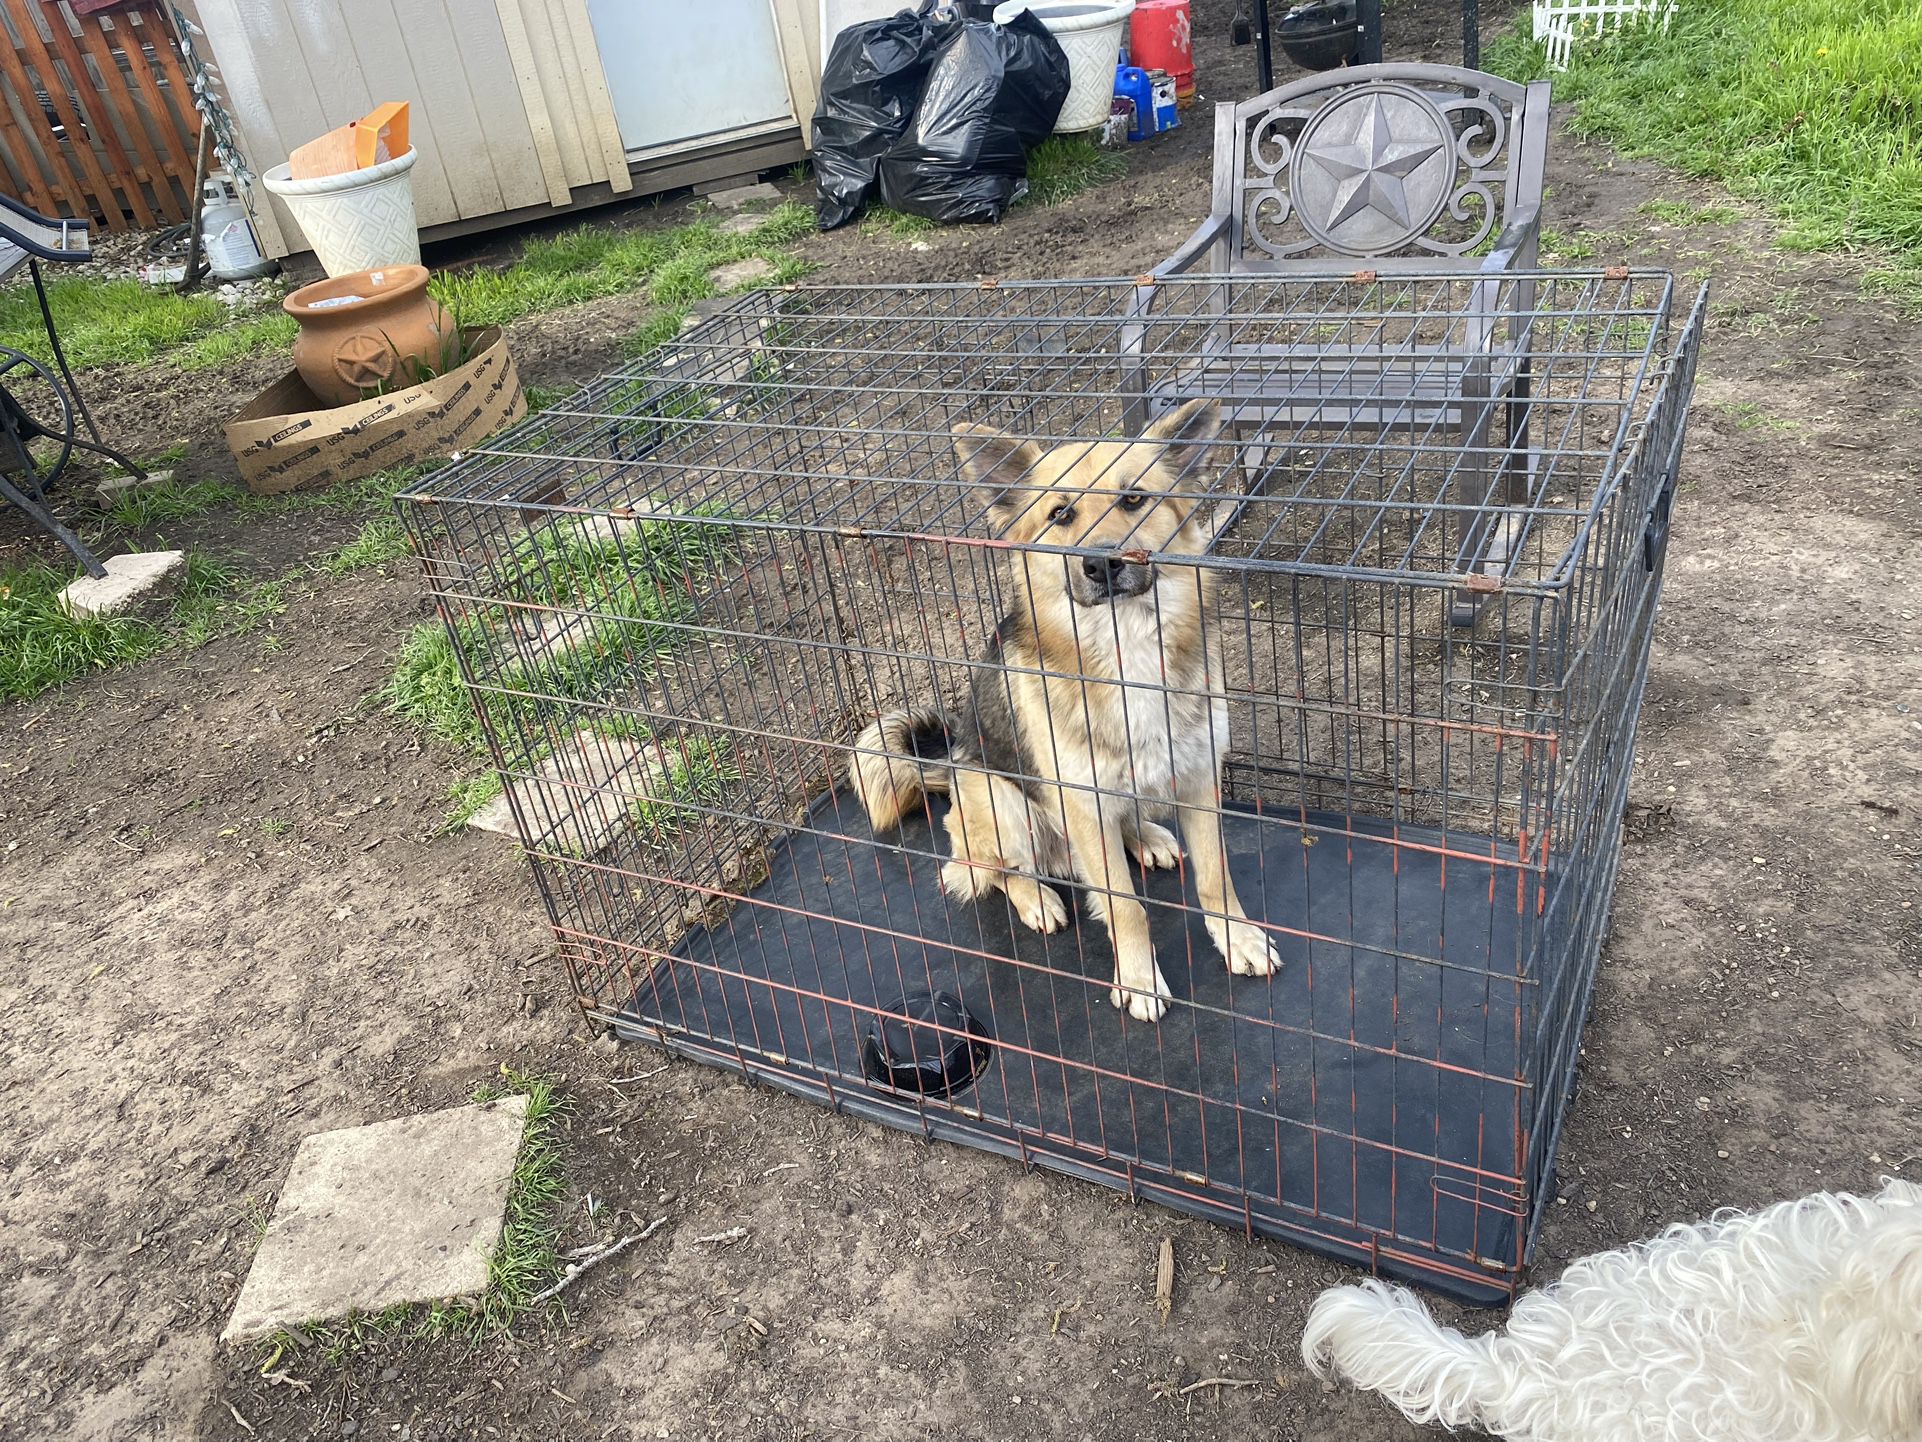 Dog Cage For Sale